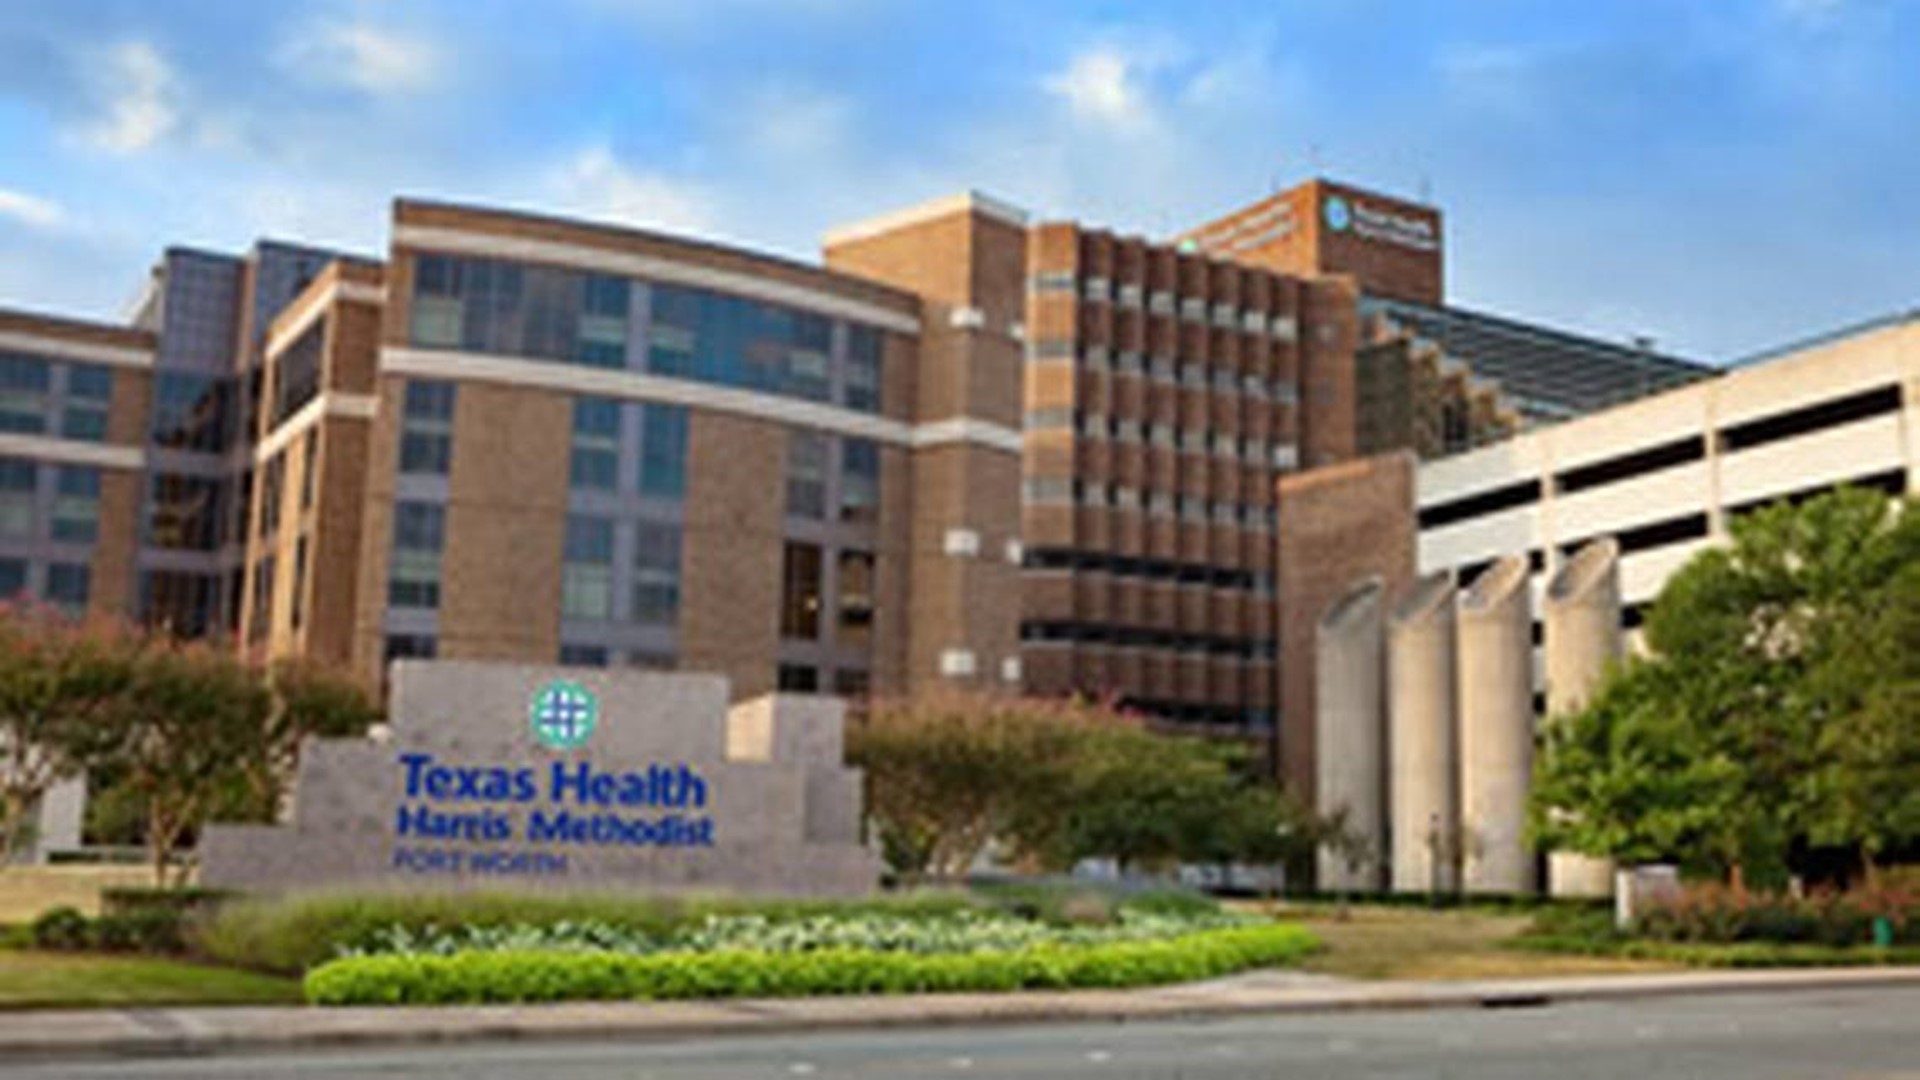 The layoffs will affect about 3 percent of Texas Health's workforce.